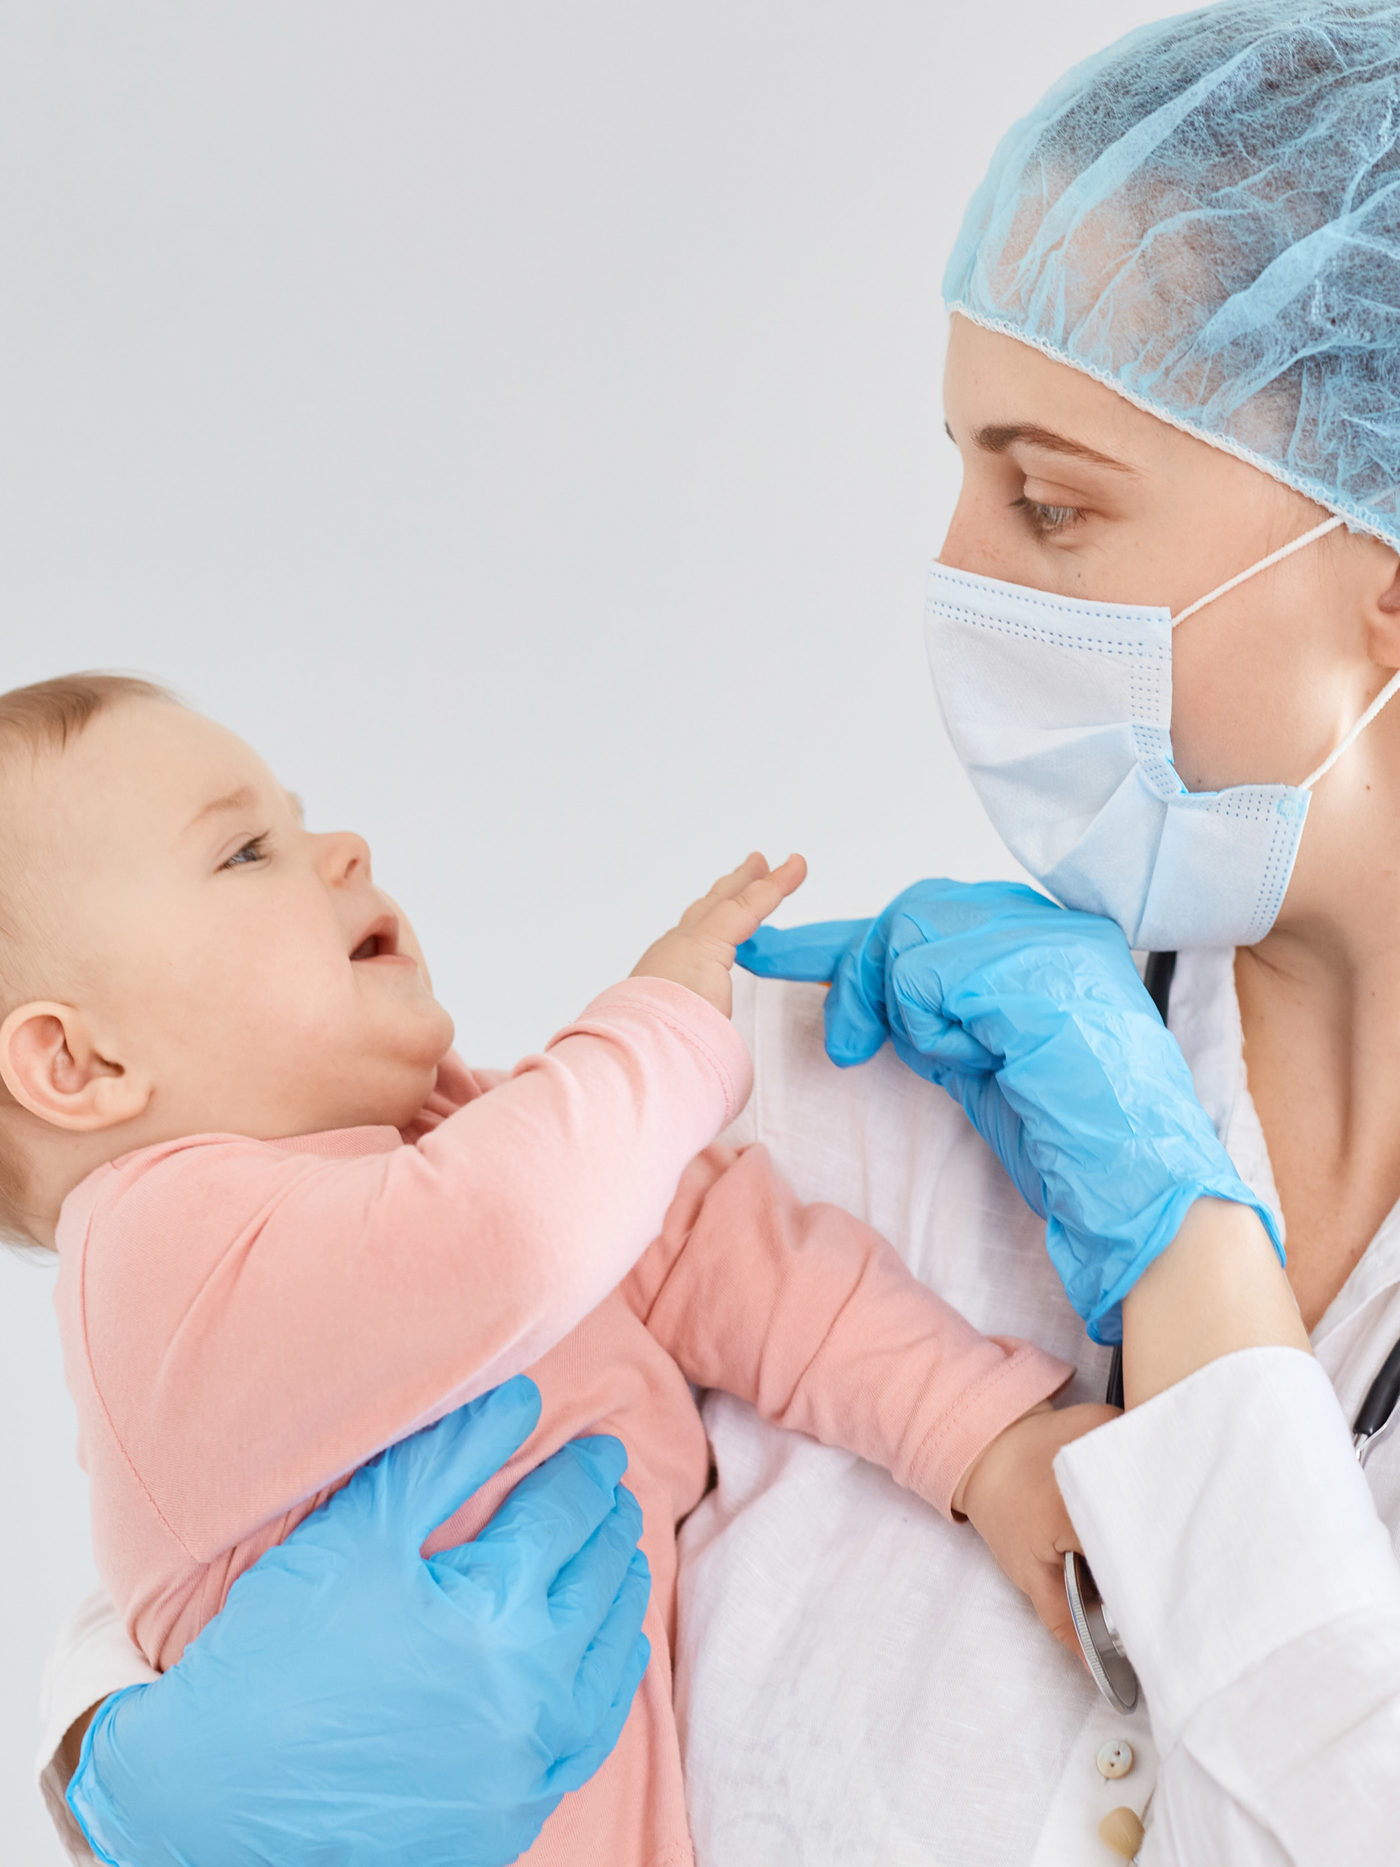 pediatrician wearing medical cap, gloves and protective mask, standing with toddler baby girl